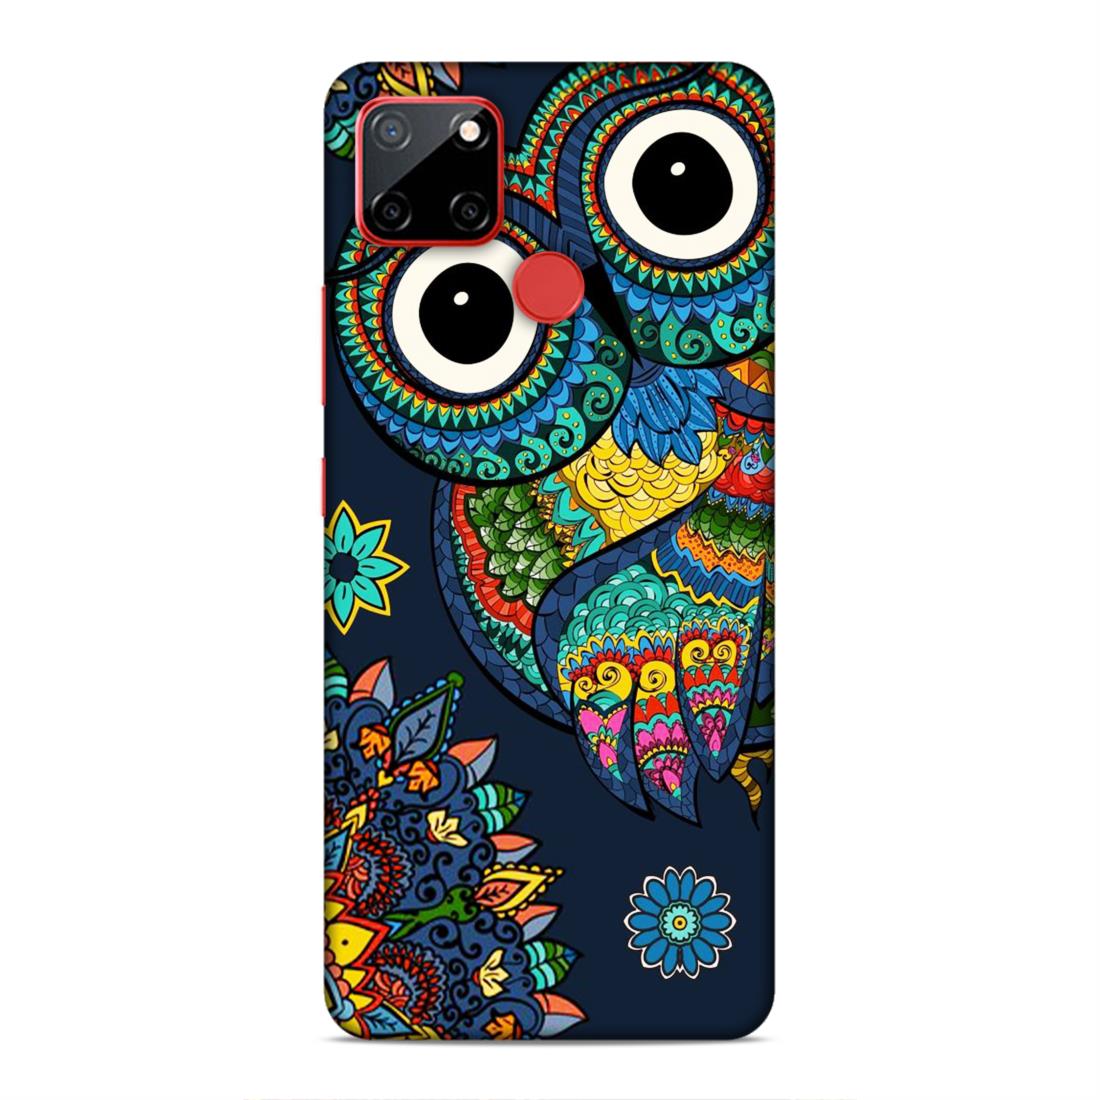 Owl and Mandala Flower Hard Back Case For Realme C12 / C25 / C25s / Narzo 20 / 30A